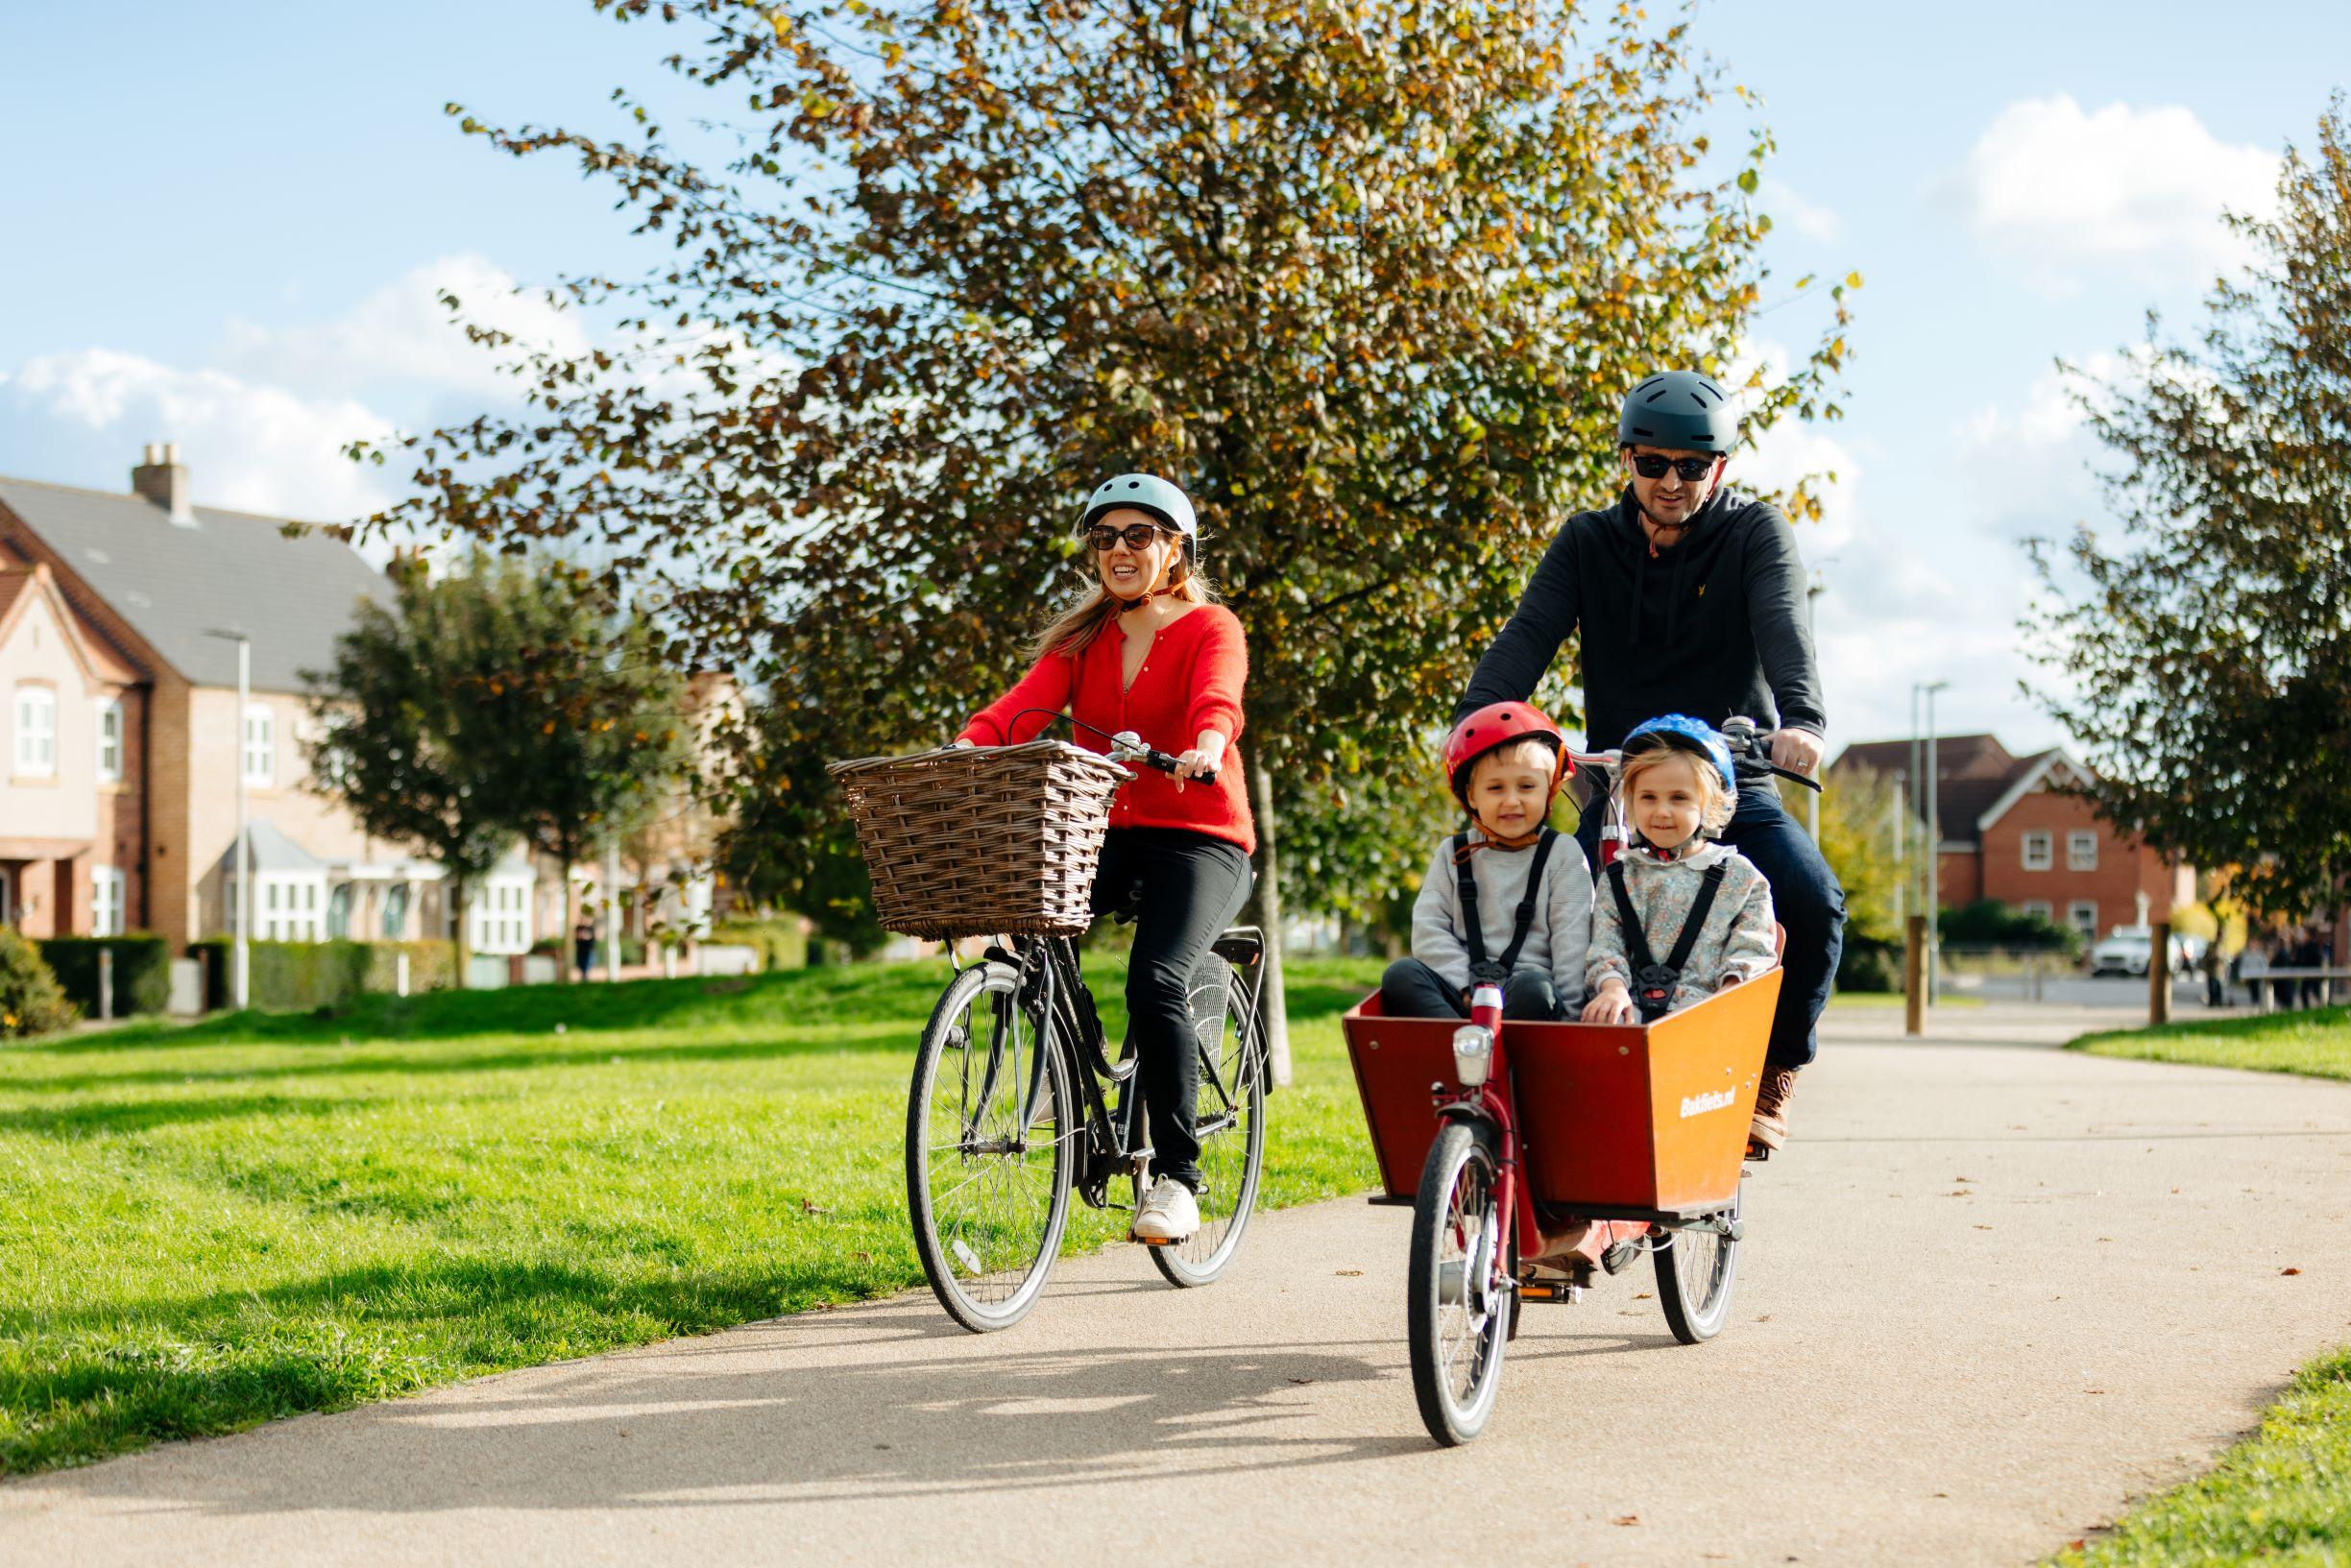 Photograph of a family with 2 young children riding bikes together along a pavement.